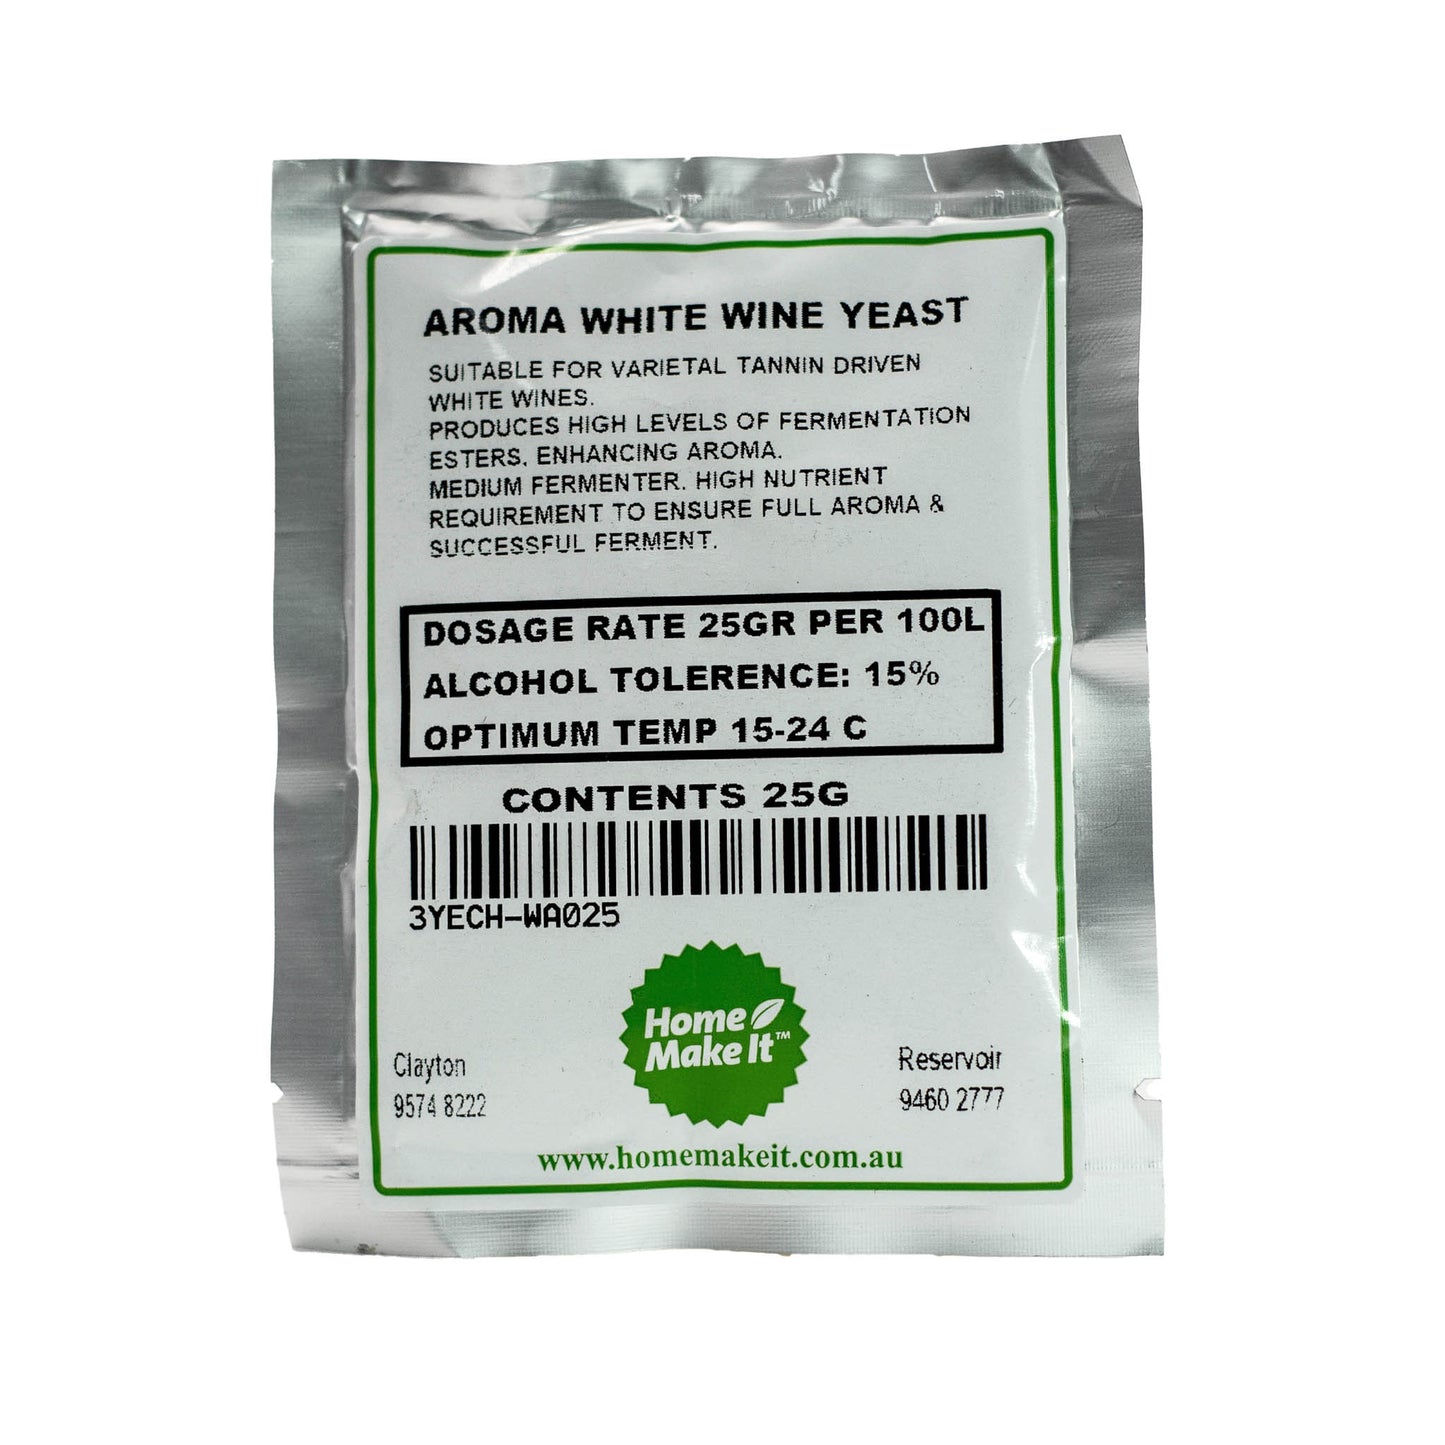 25g packet of white wine yeast for tannin driven white wines